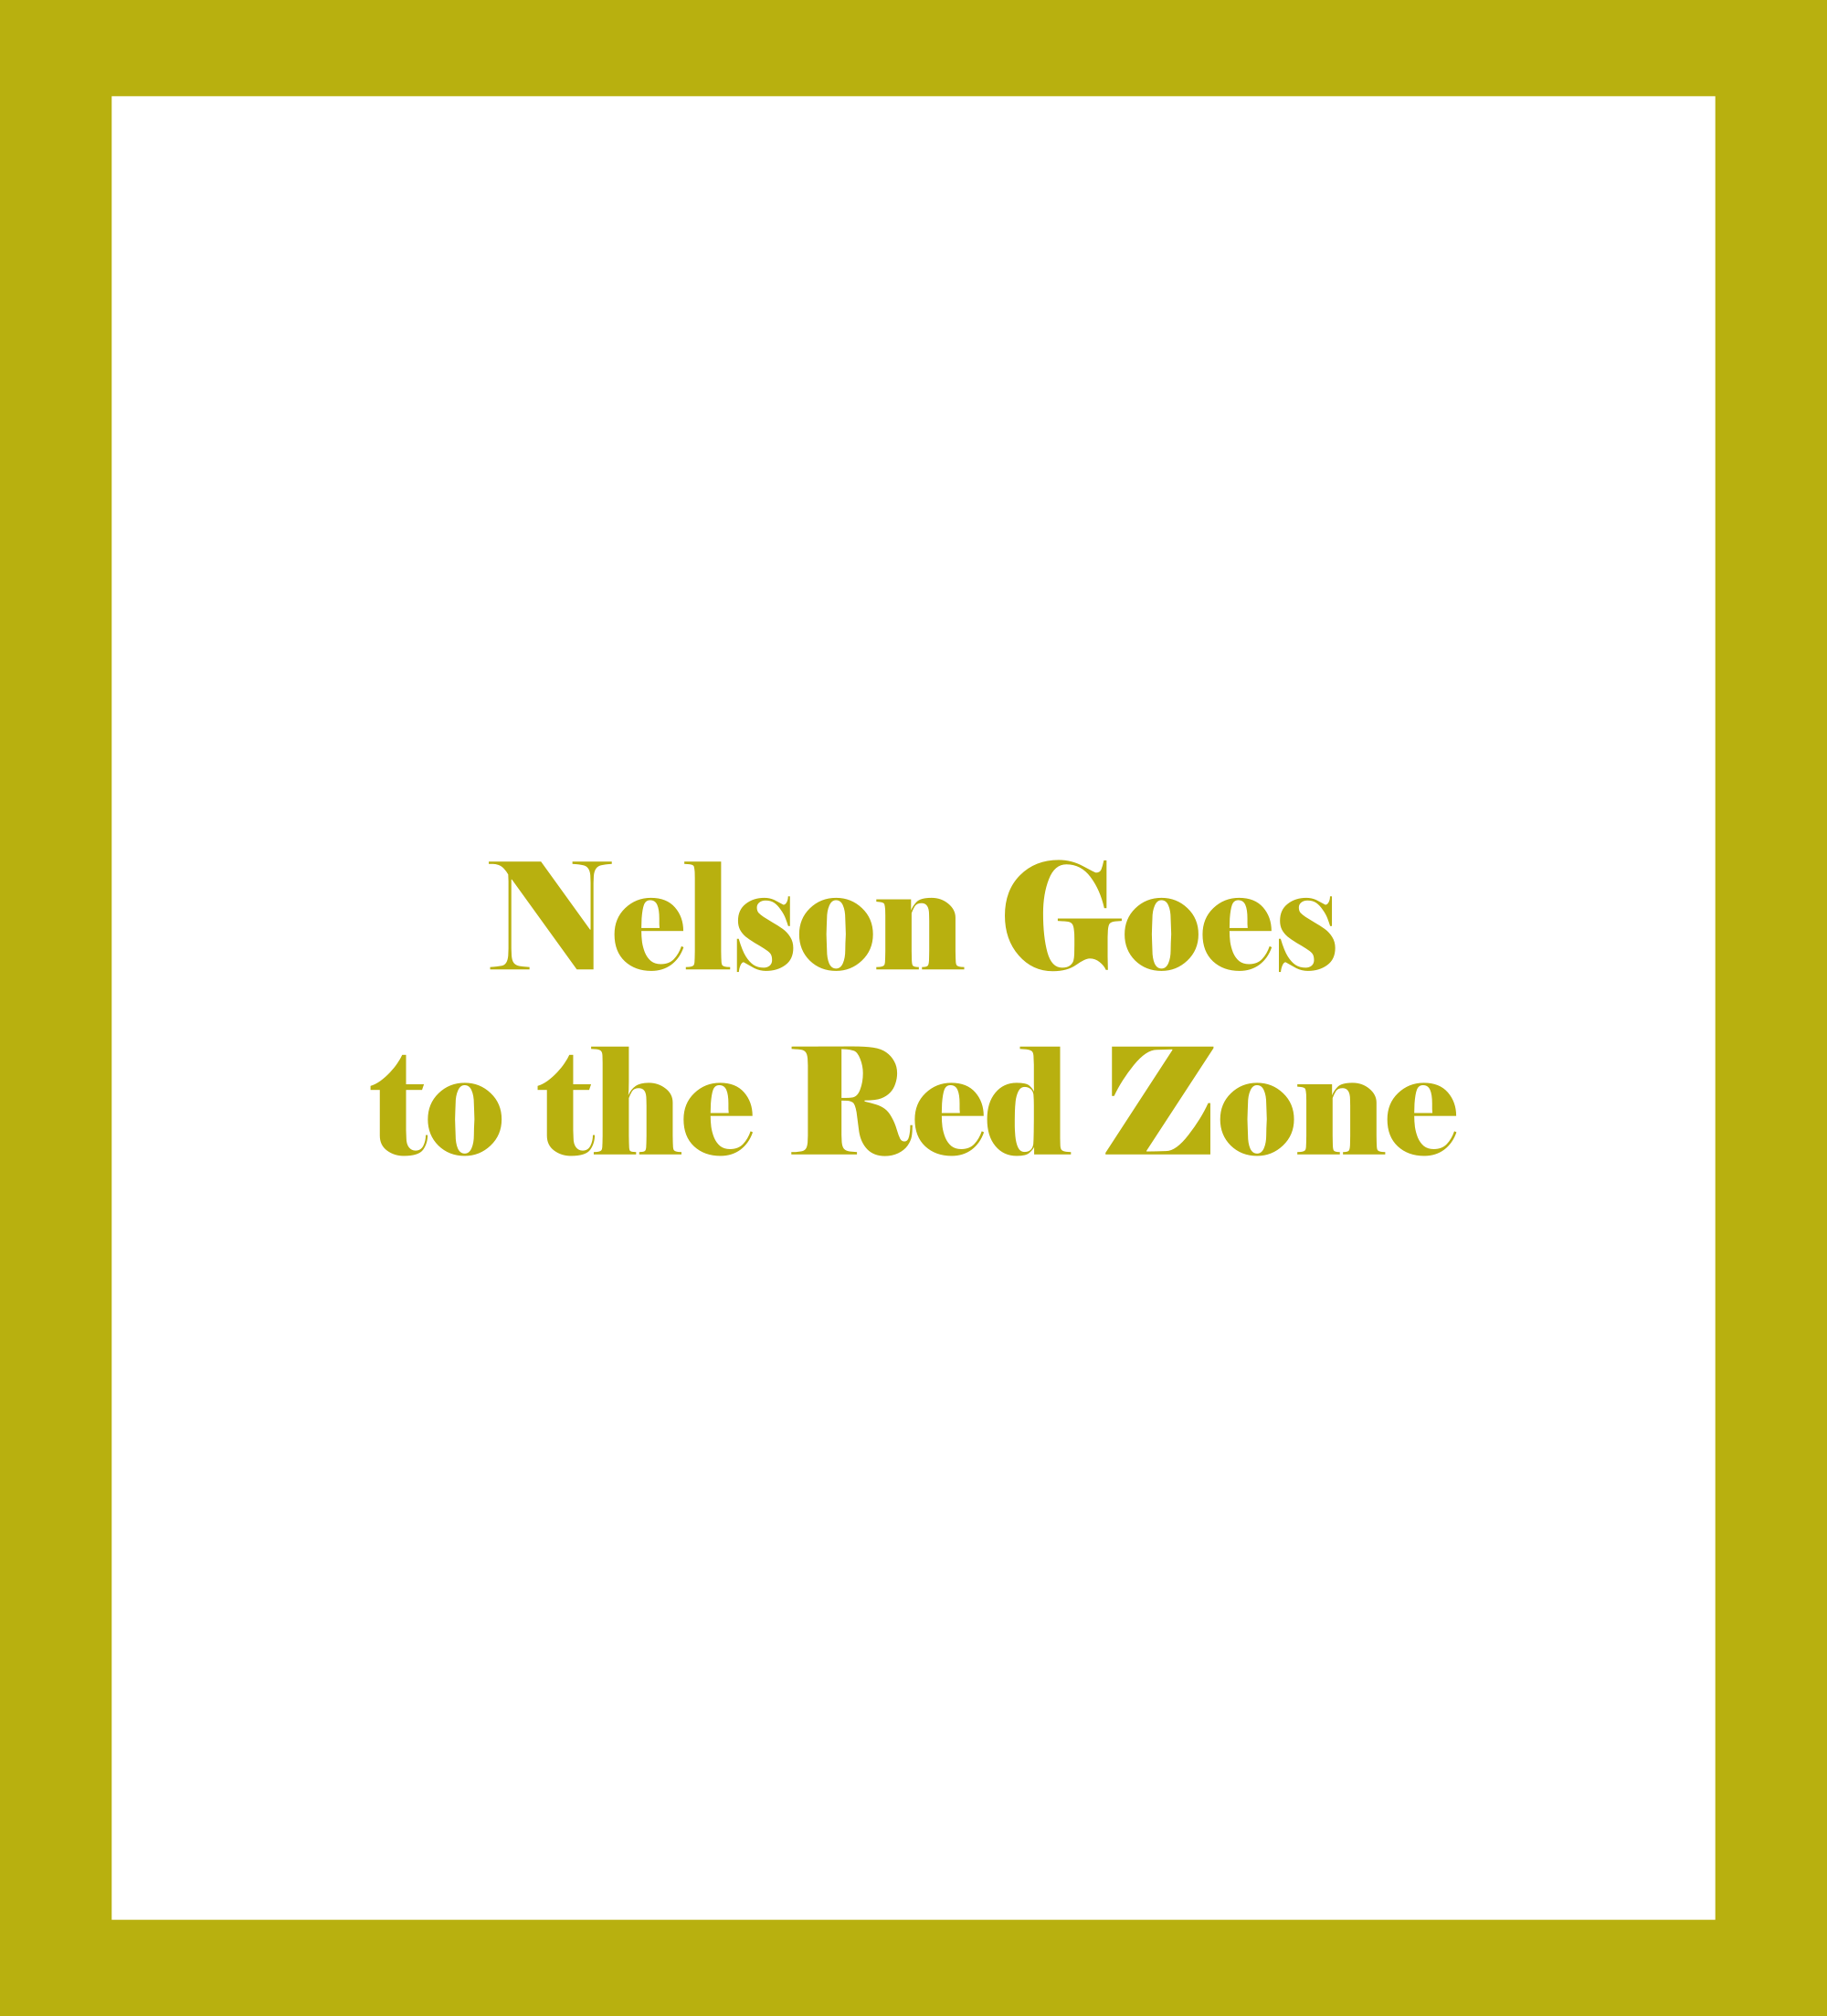 Caratula de Nelson Goes to the Red Zone (Nelson Goes to the Red Zone) 